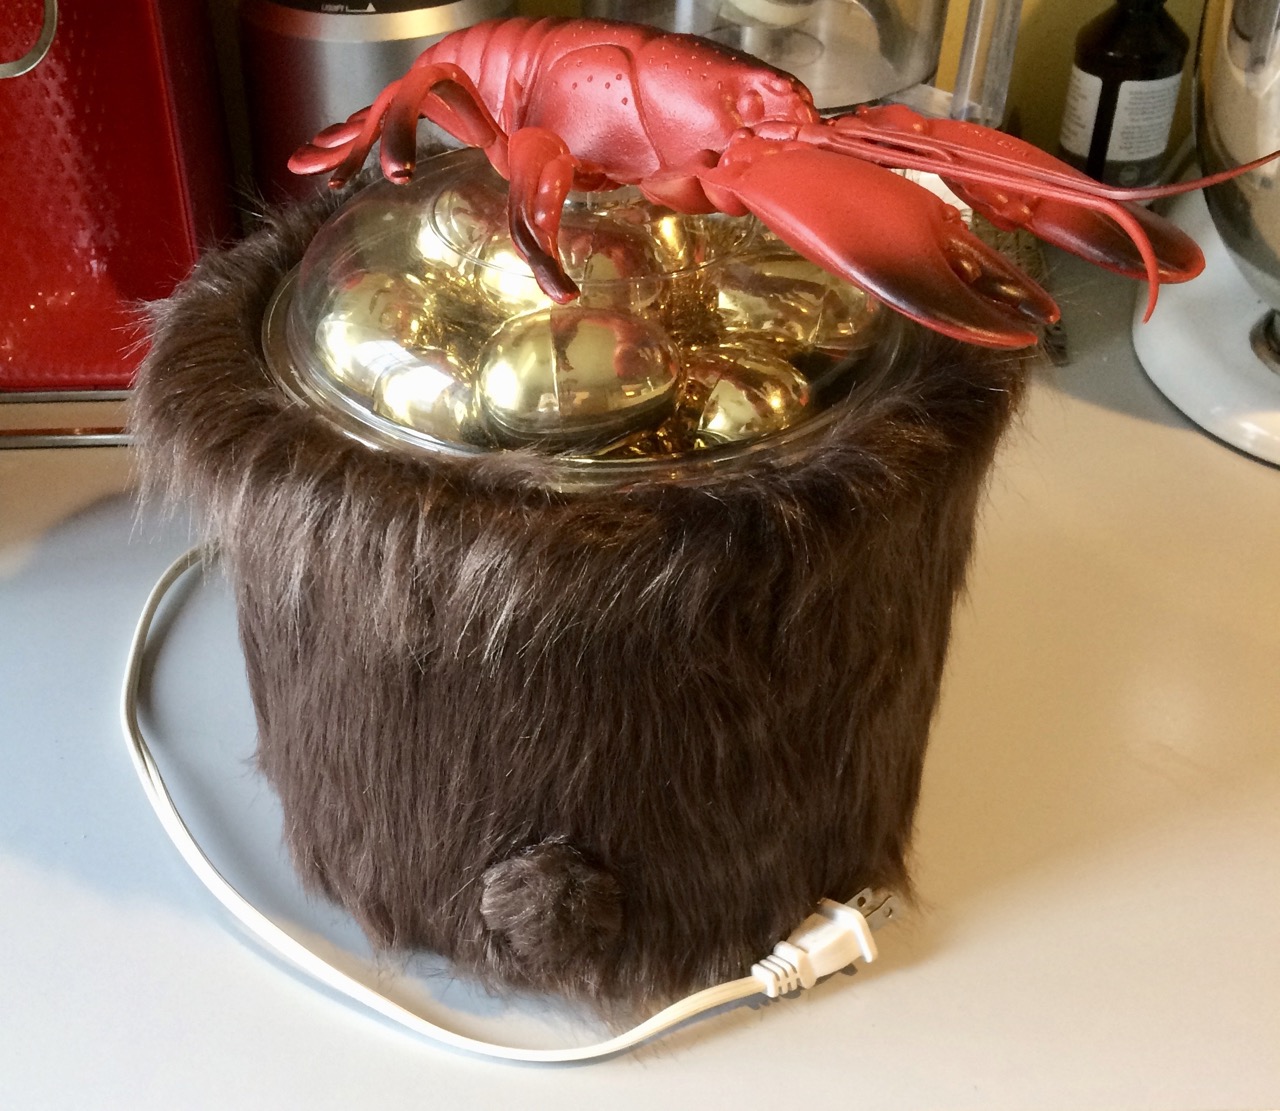 a fur-covered crock pot full of golden eggs with a lid with a lobster for a handle